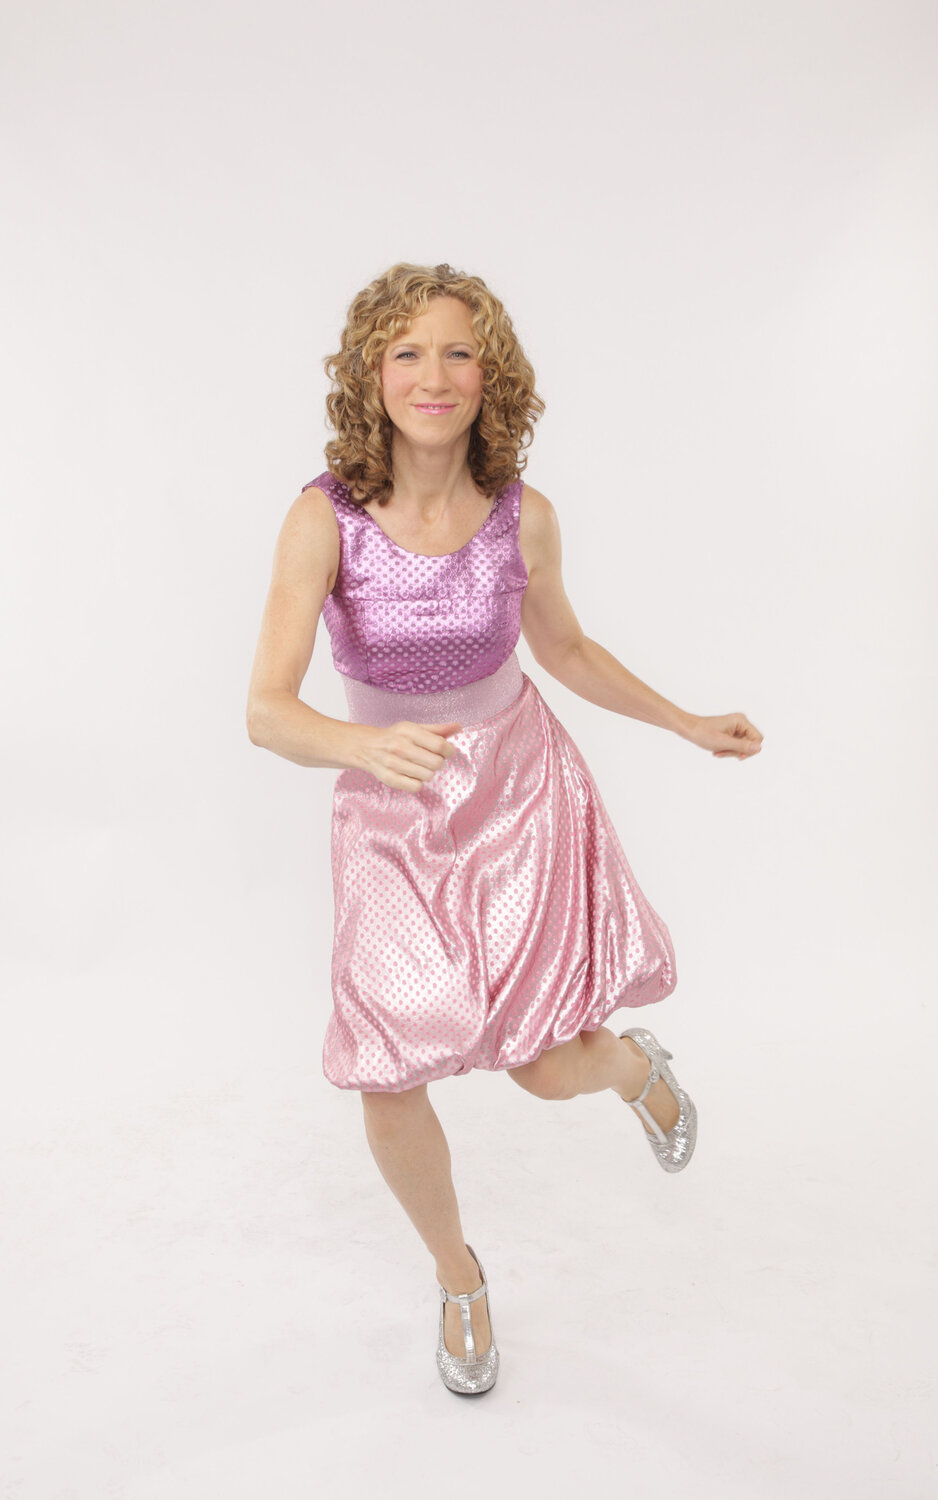 Laurie dances her way to center stage this holiday season!